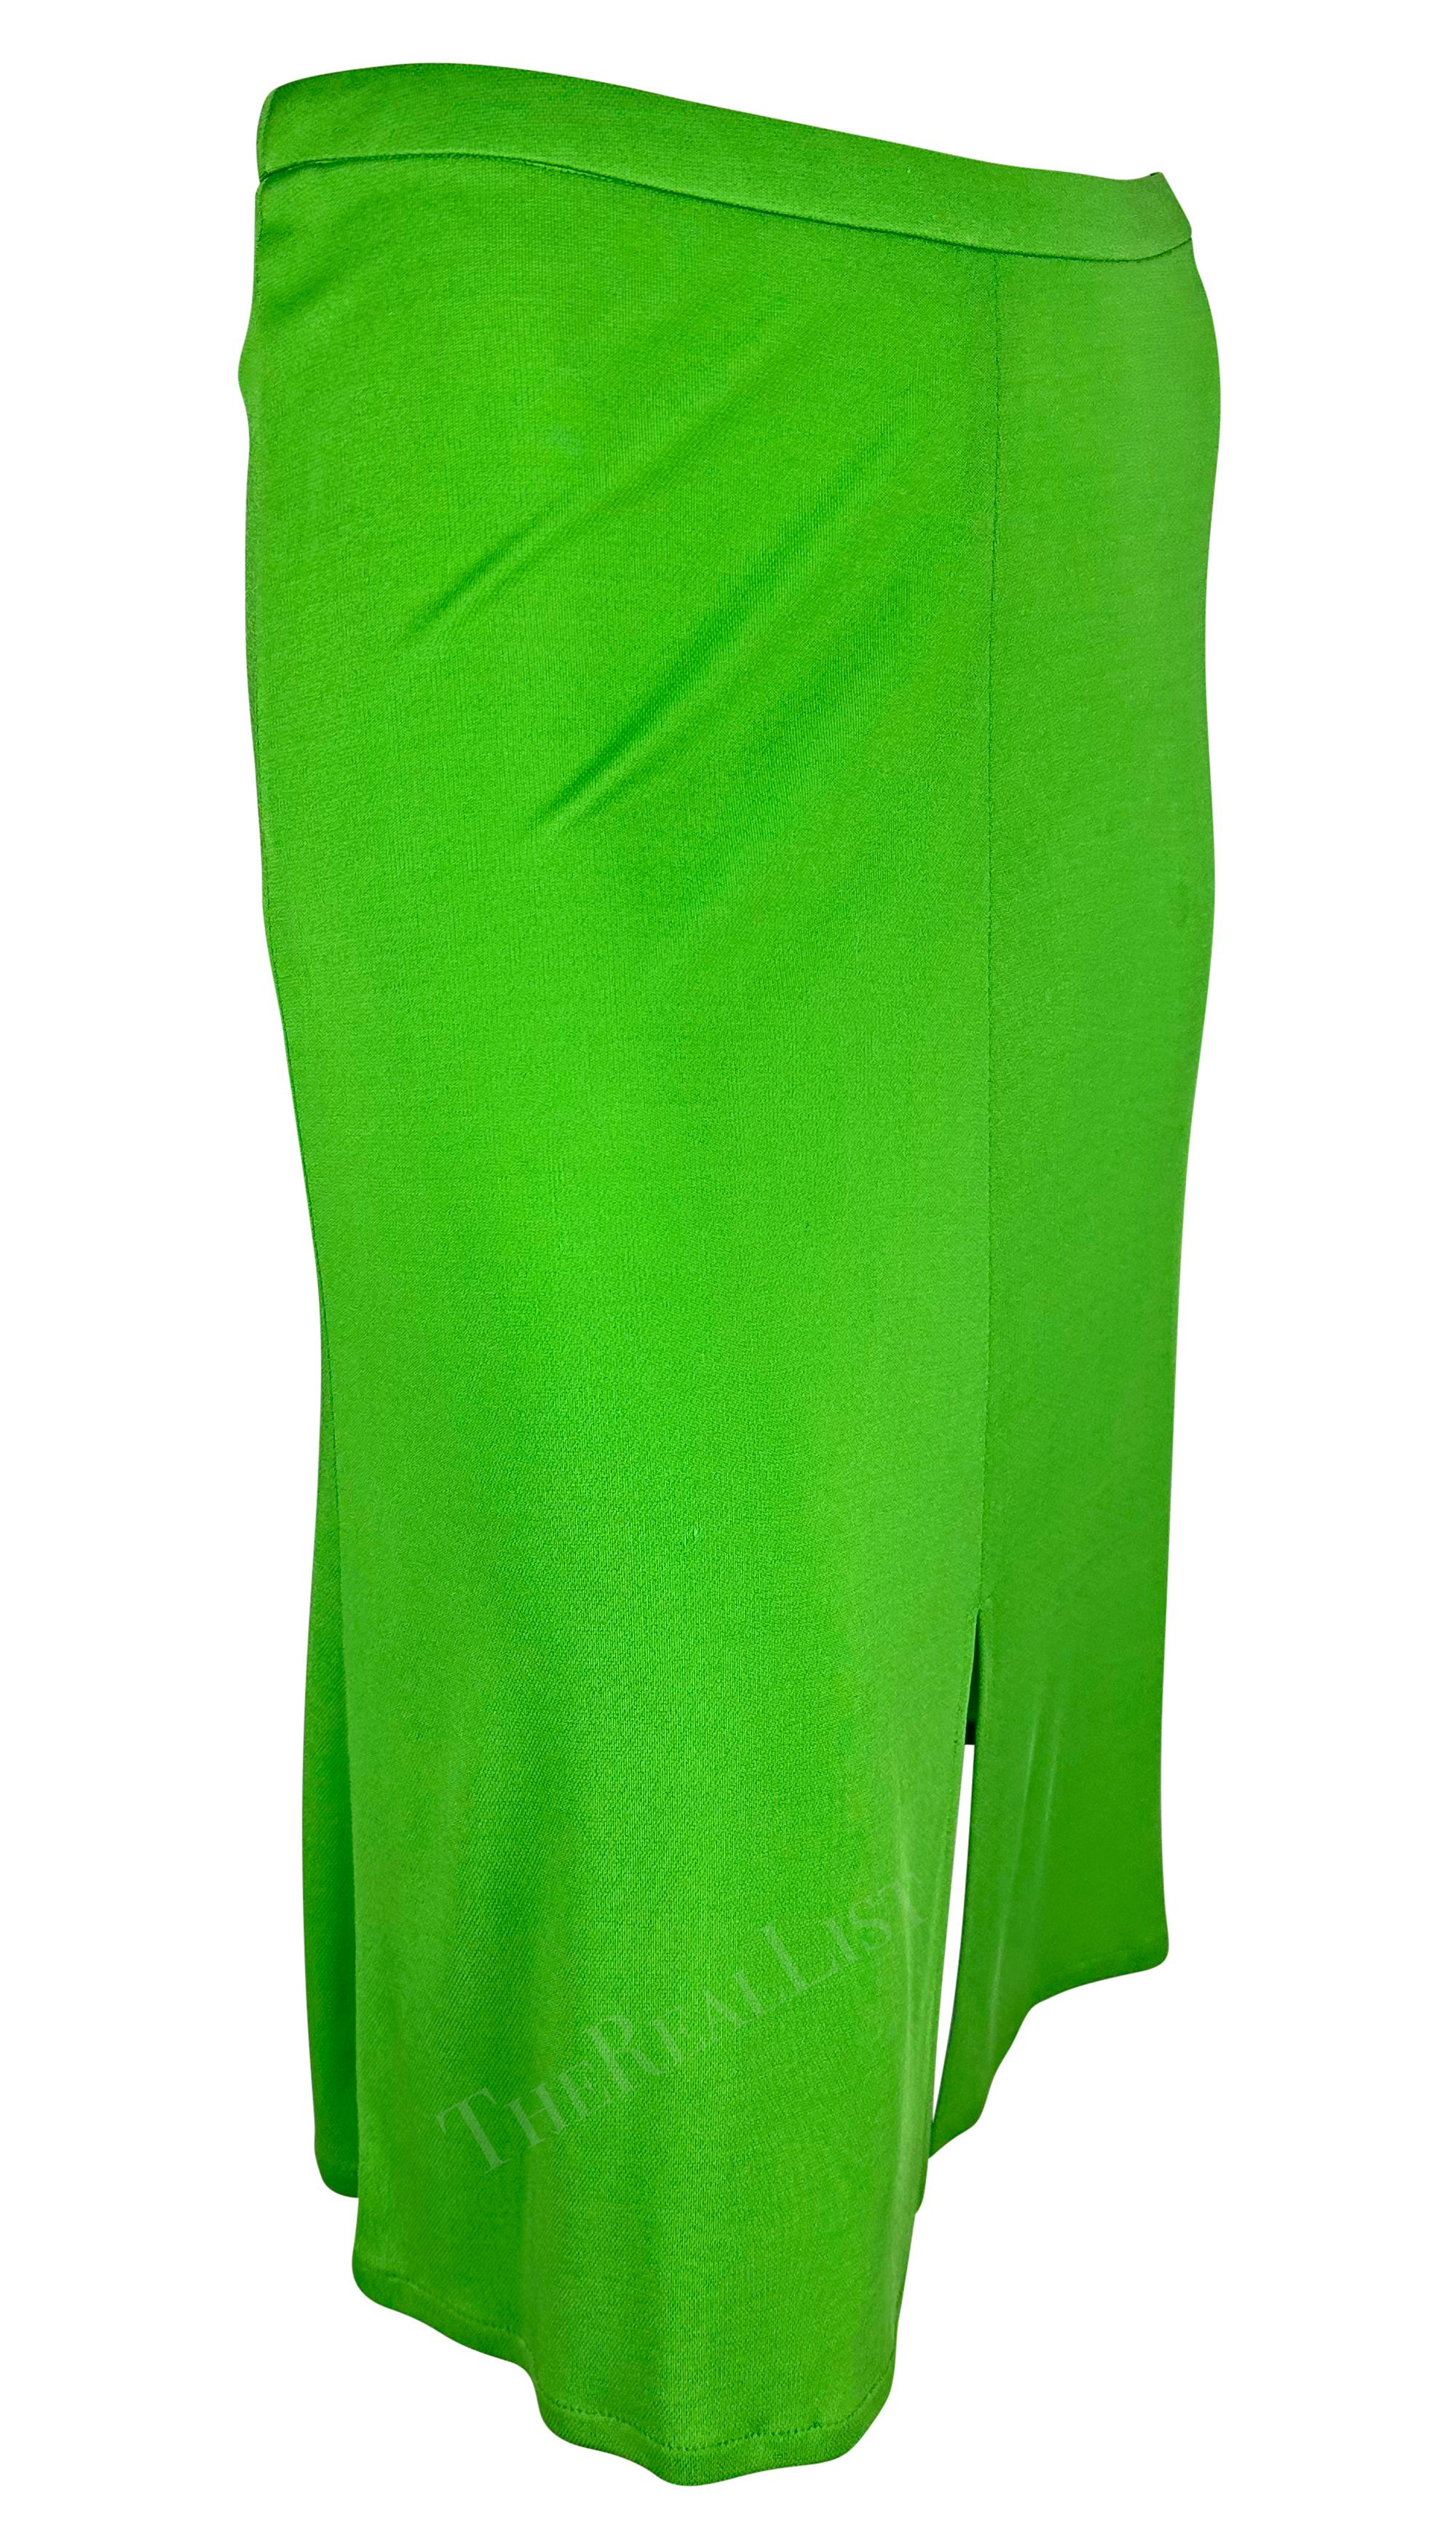 S/S 2000 Gianni Versace by Donatella Bright Green Viscose Slit Skirt For Sale 2